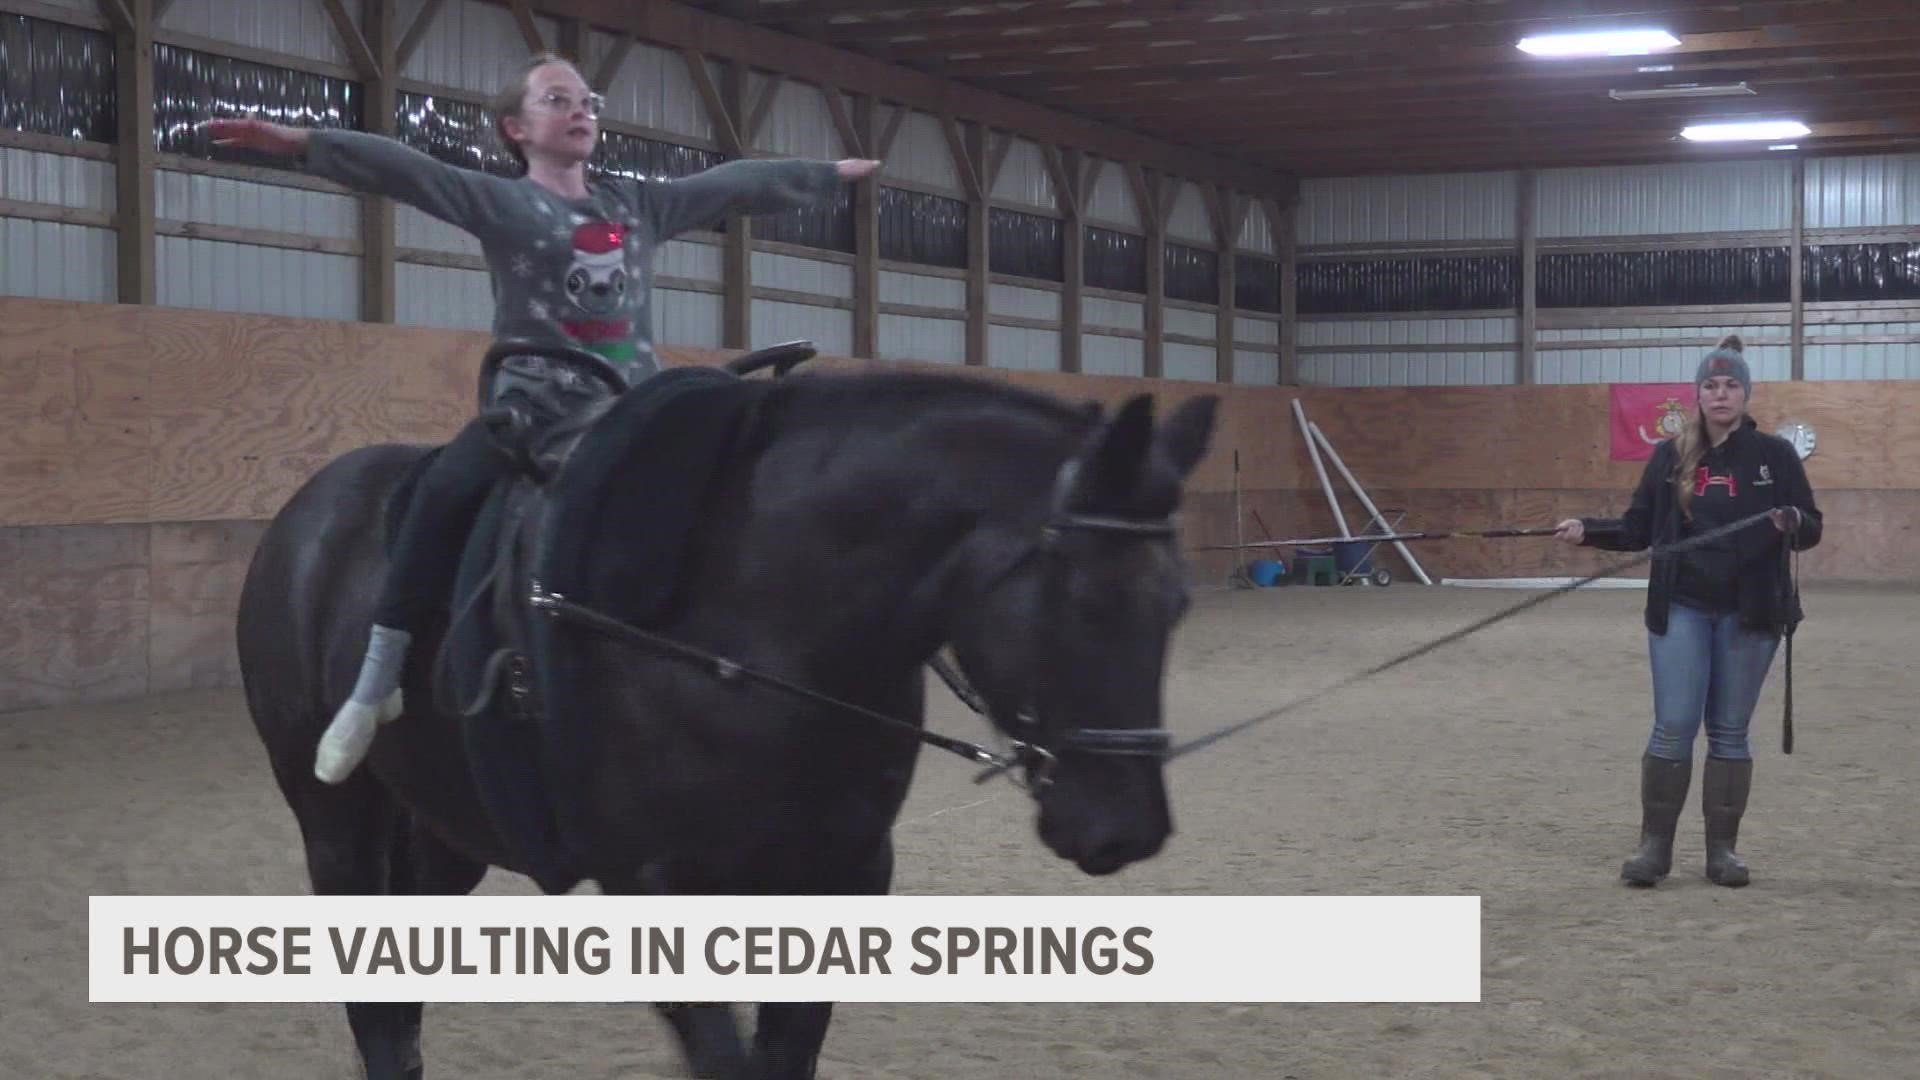 We took a closer look into equestrian vaulting and a business owner's drive to get more kids involved in the one-of-a-kind sport.